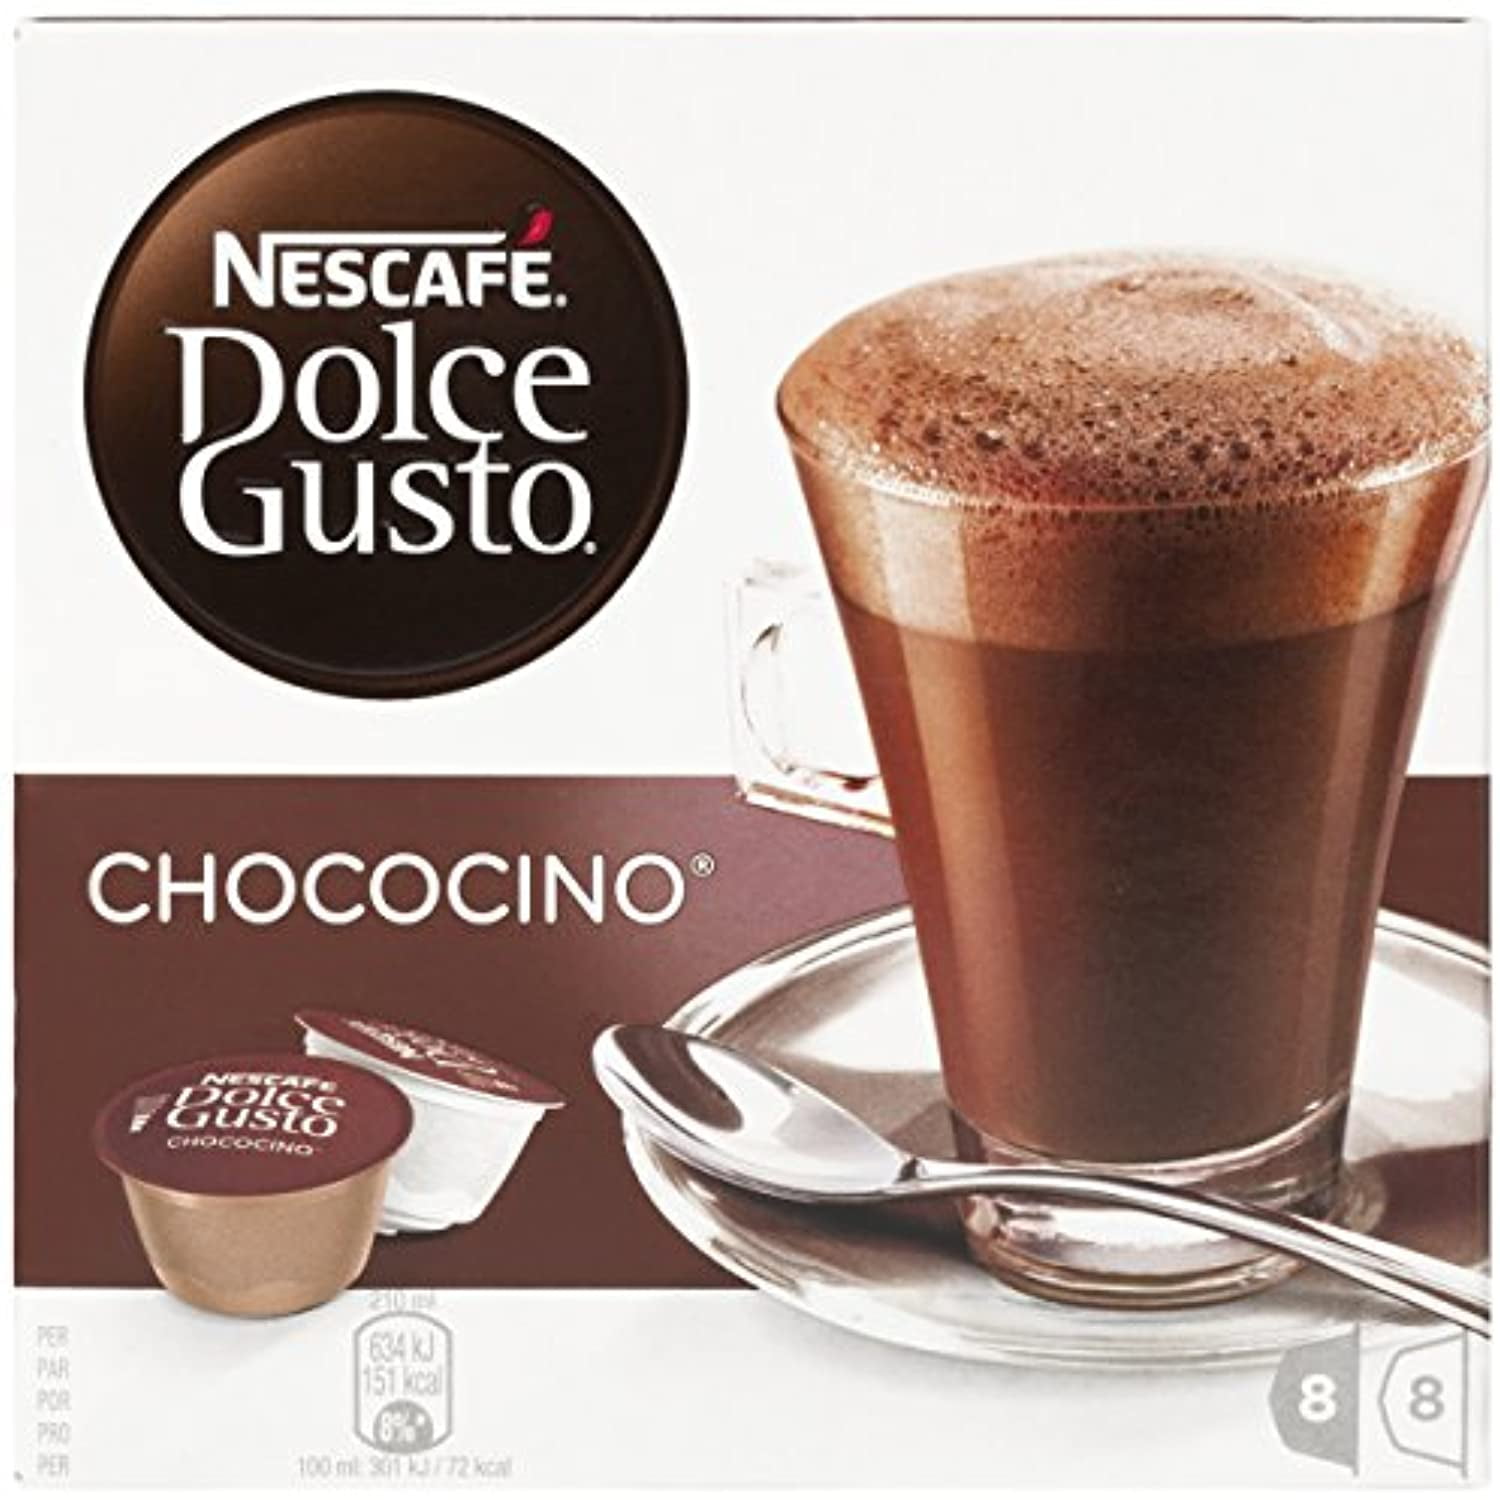 Nescafe Dolce Gusto Chococino Unboxing and Brewing 